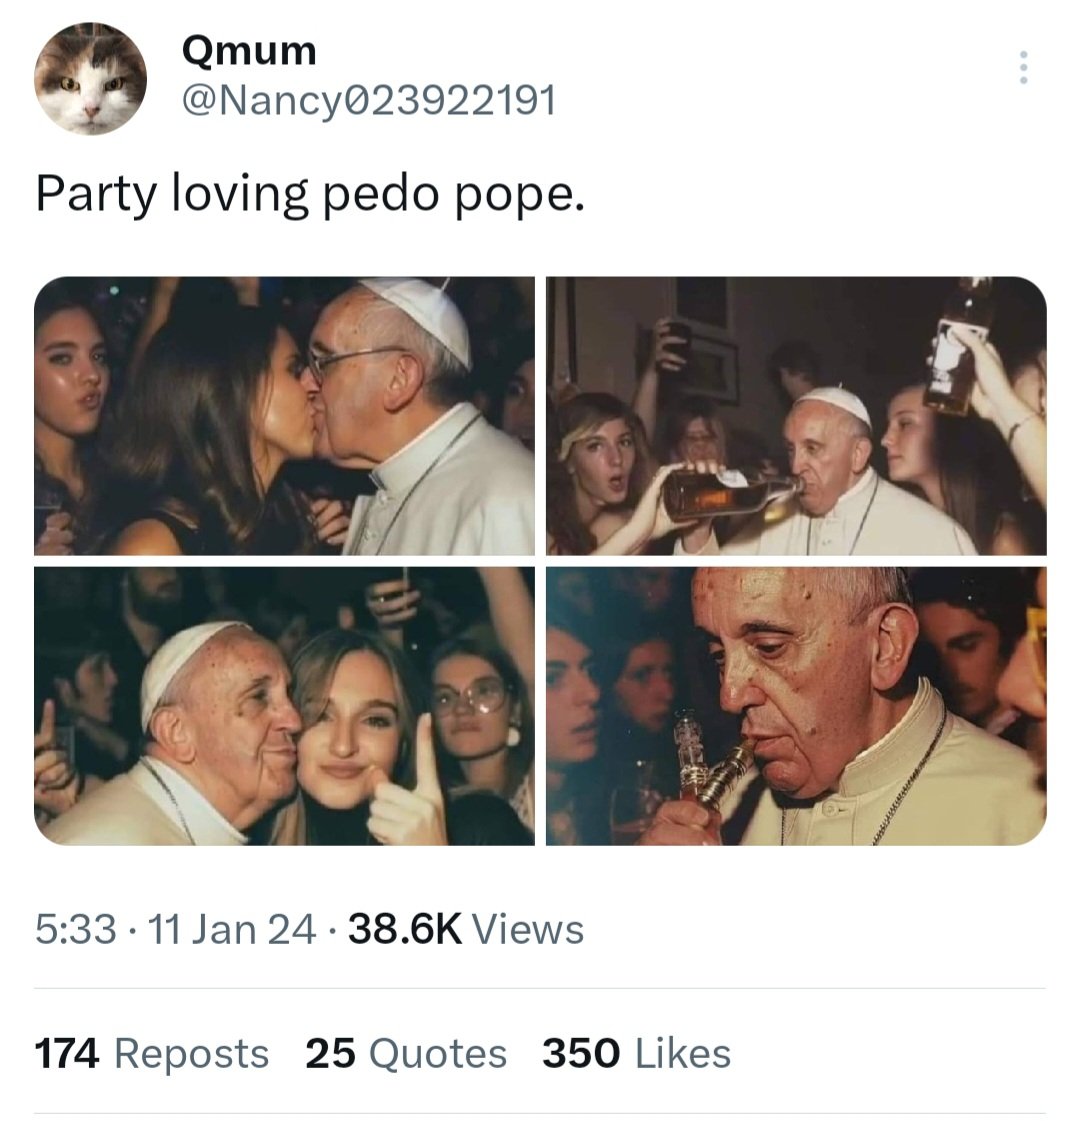 These images of Pope Francis posted by a QAnon follower are obviously AI-generated and fake.